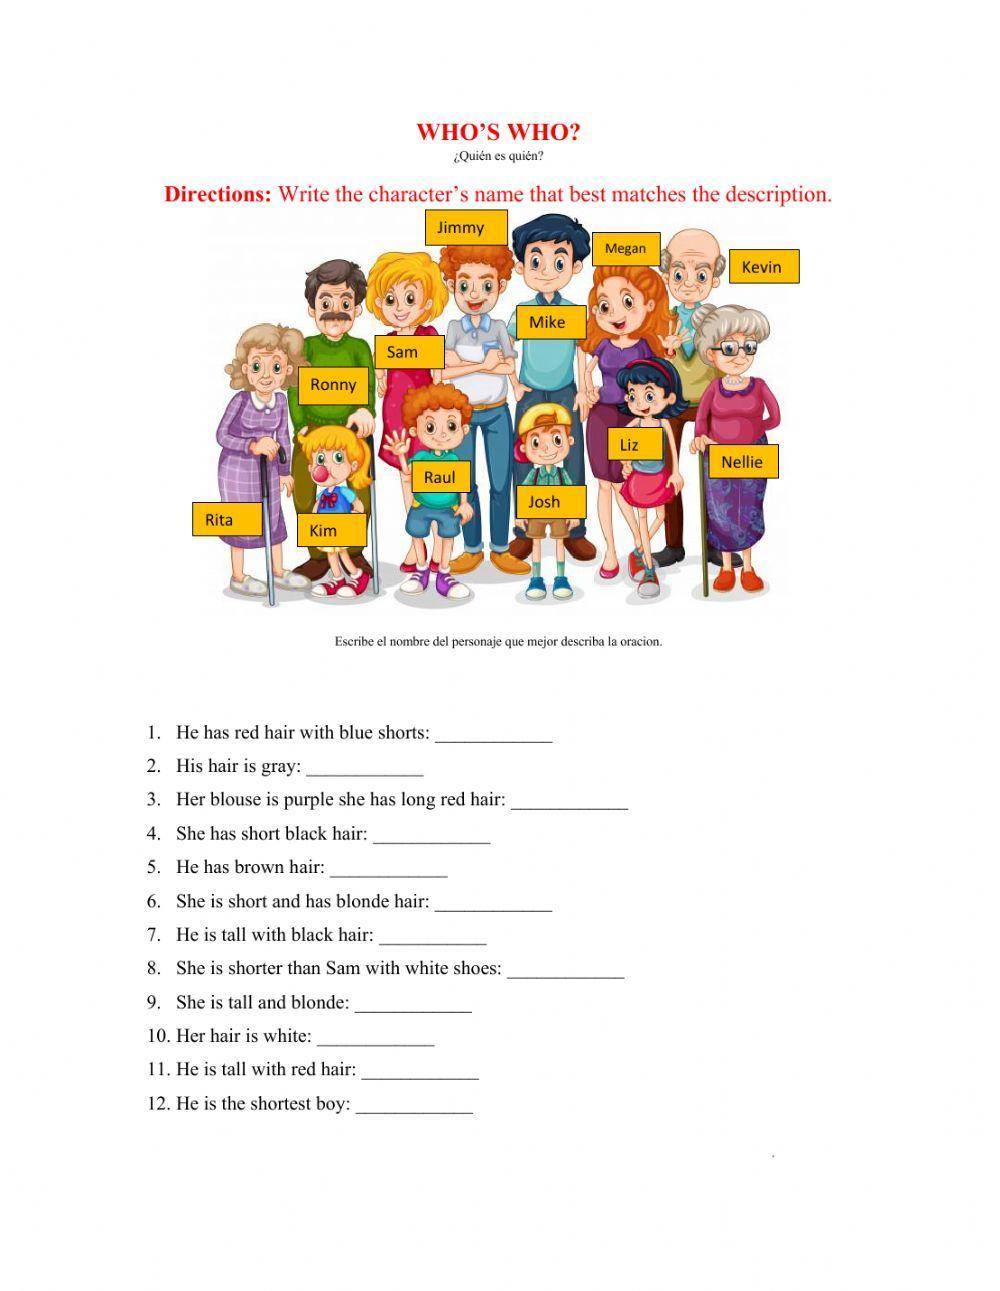 Who's Who.WORKSHEET